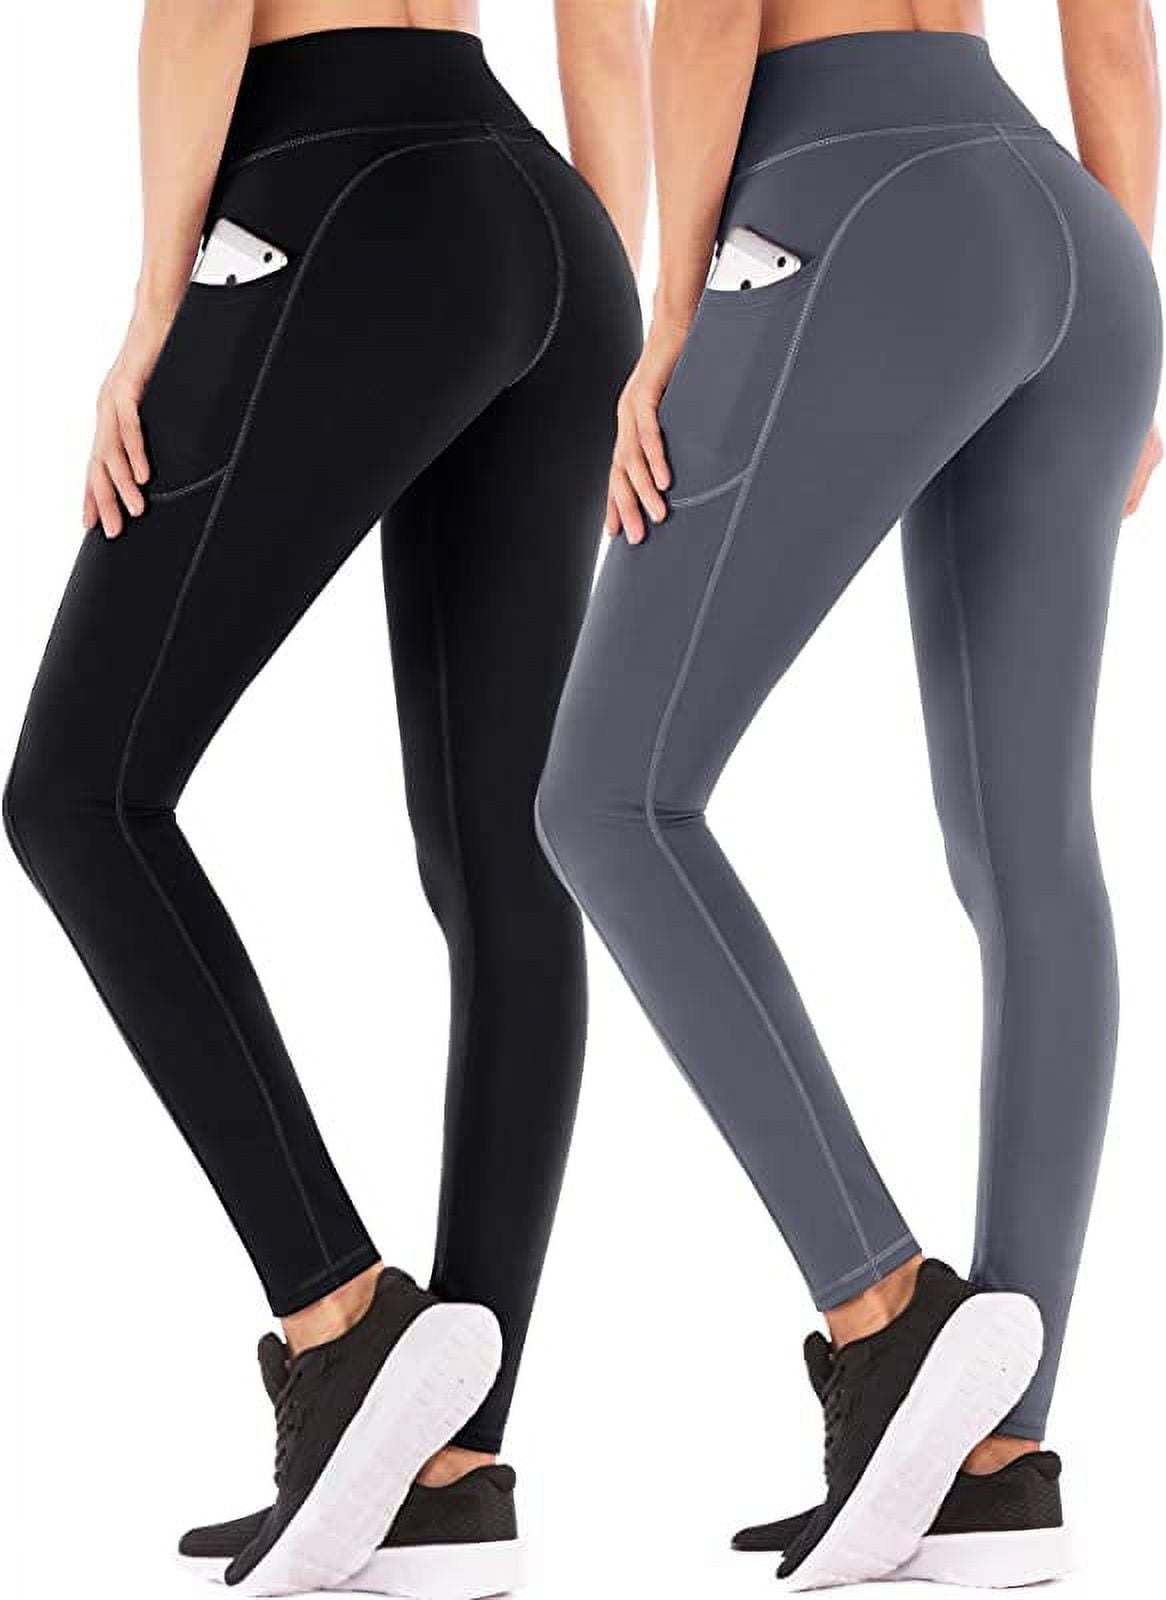 Iuga Yoga Pants With Pockets, Workout Running Leggings With